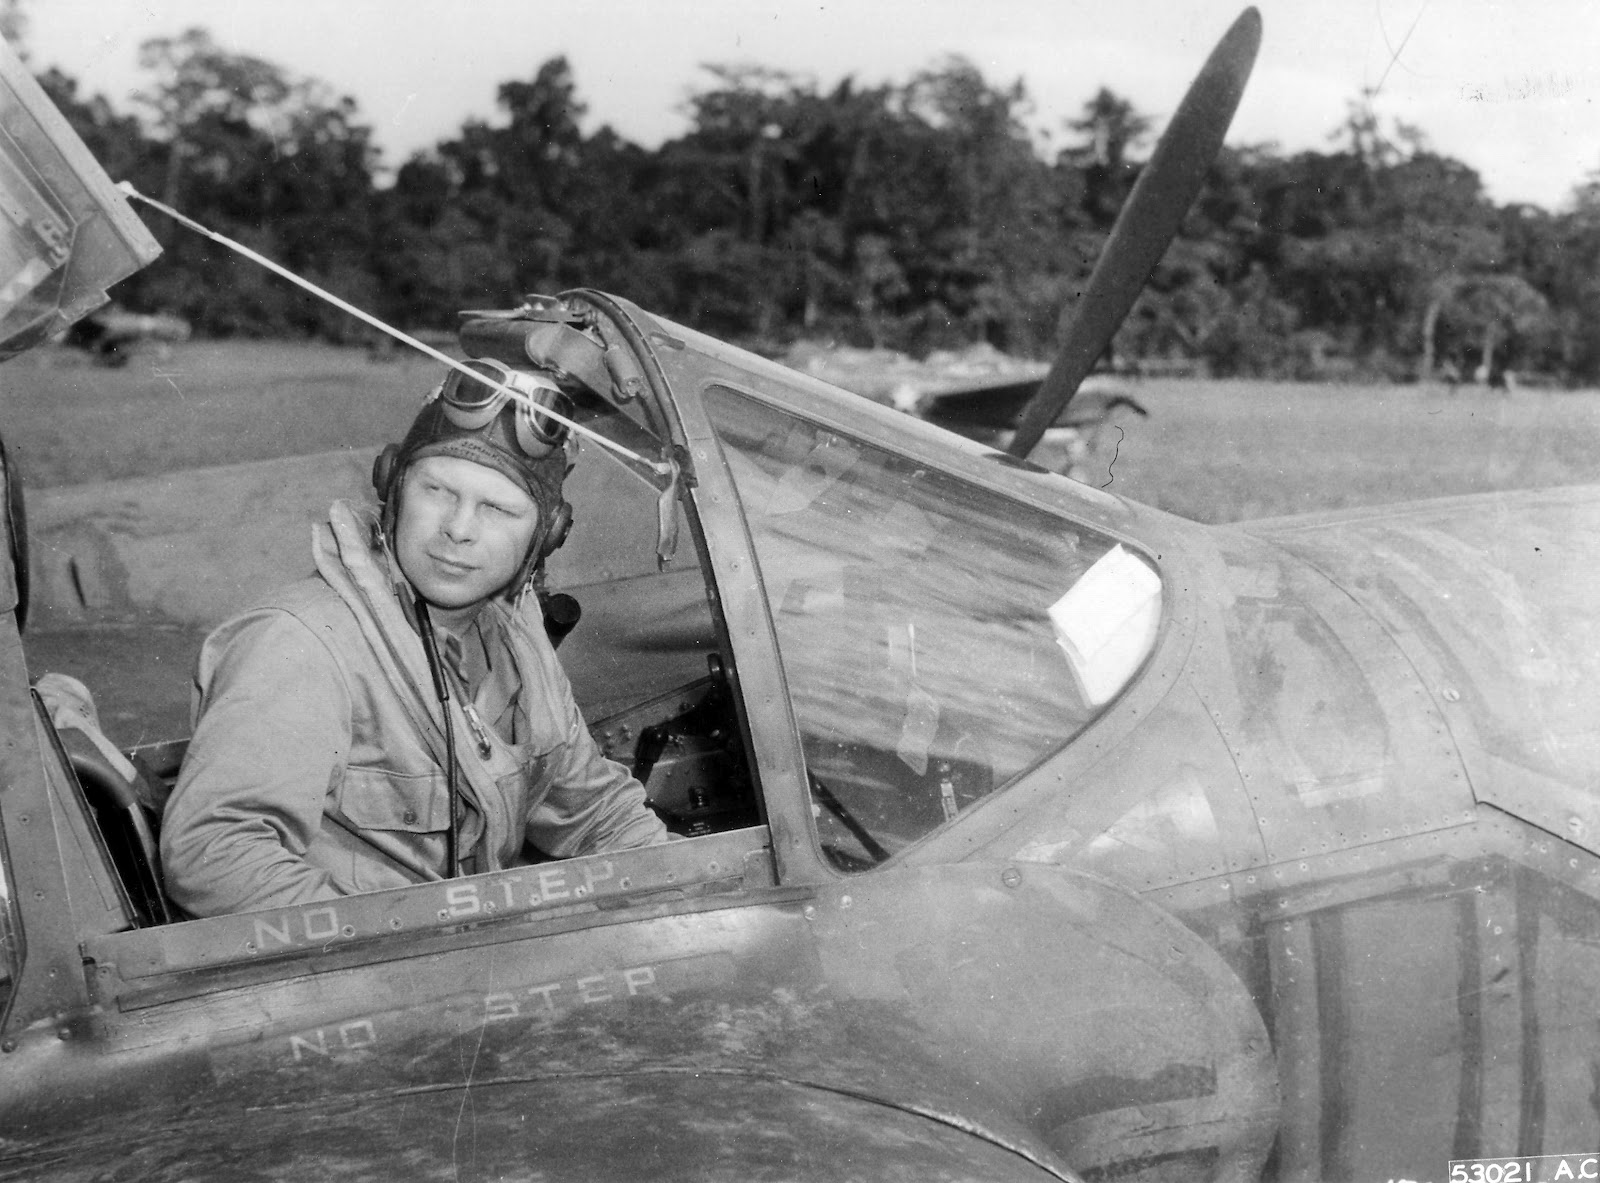 USAAF Major Richard Bong in his P-38 Lightning aircraft 'Marge', Dobodura, New Guinea, date unknown, photo 1 of 2